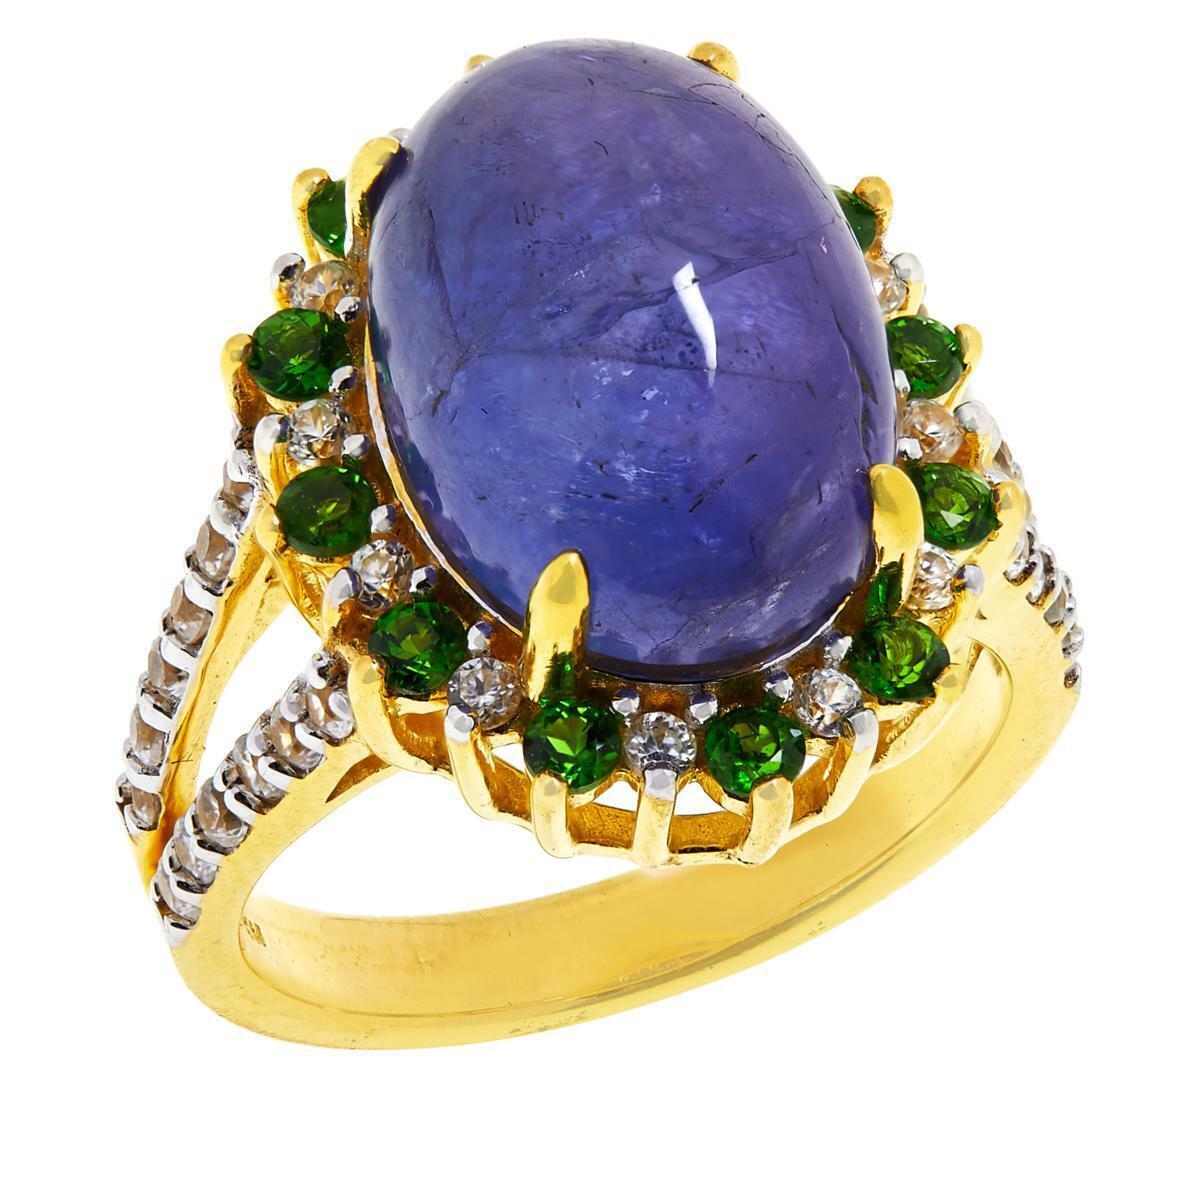 Colleen Lopez Gold-Plated Tanzanite, Chrome Diopside & Zircon Ring, Size 9